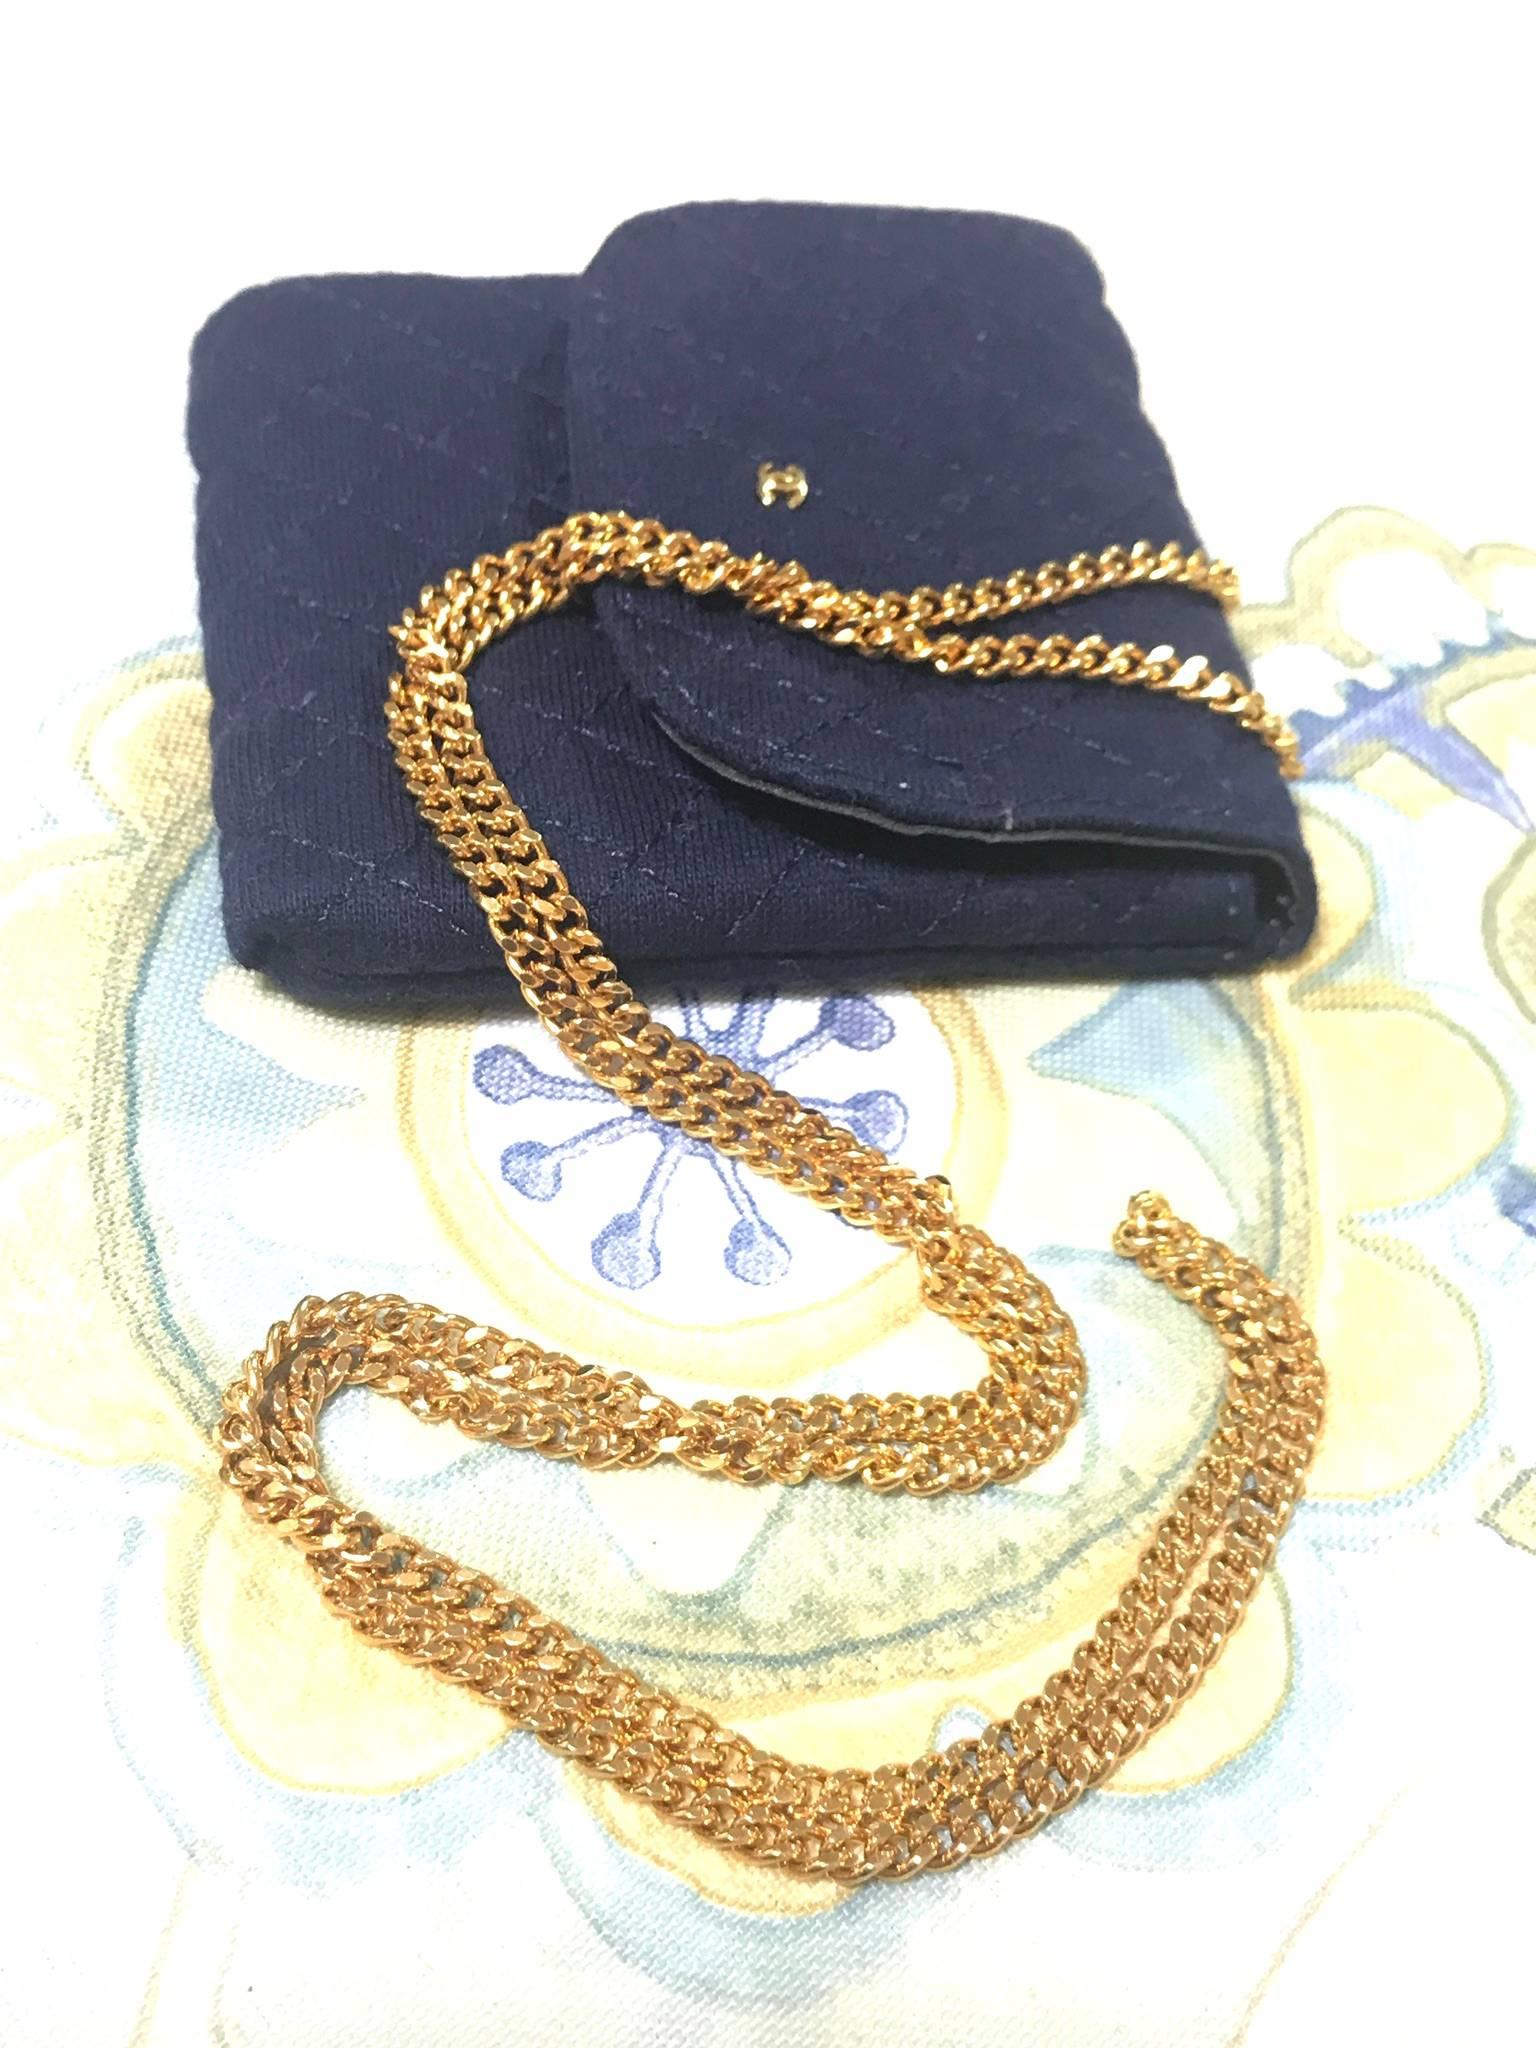 MINT. Vintage Chanel navy quilted jersey mini pouch, coin purse, long necklace. 2